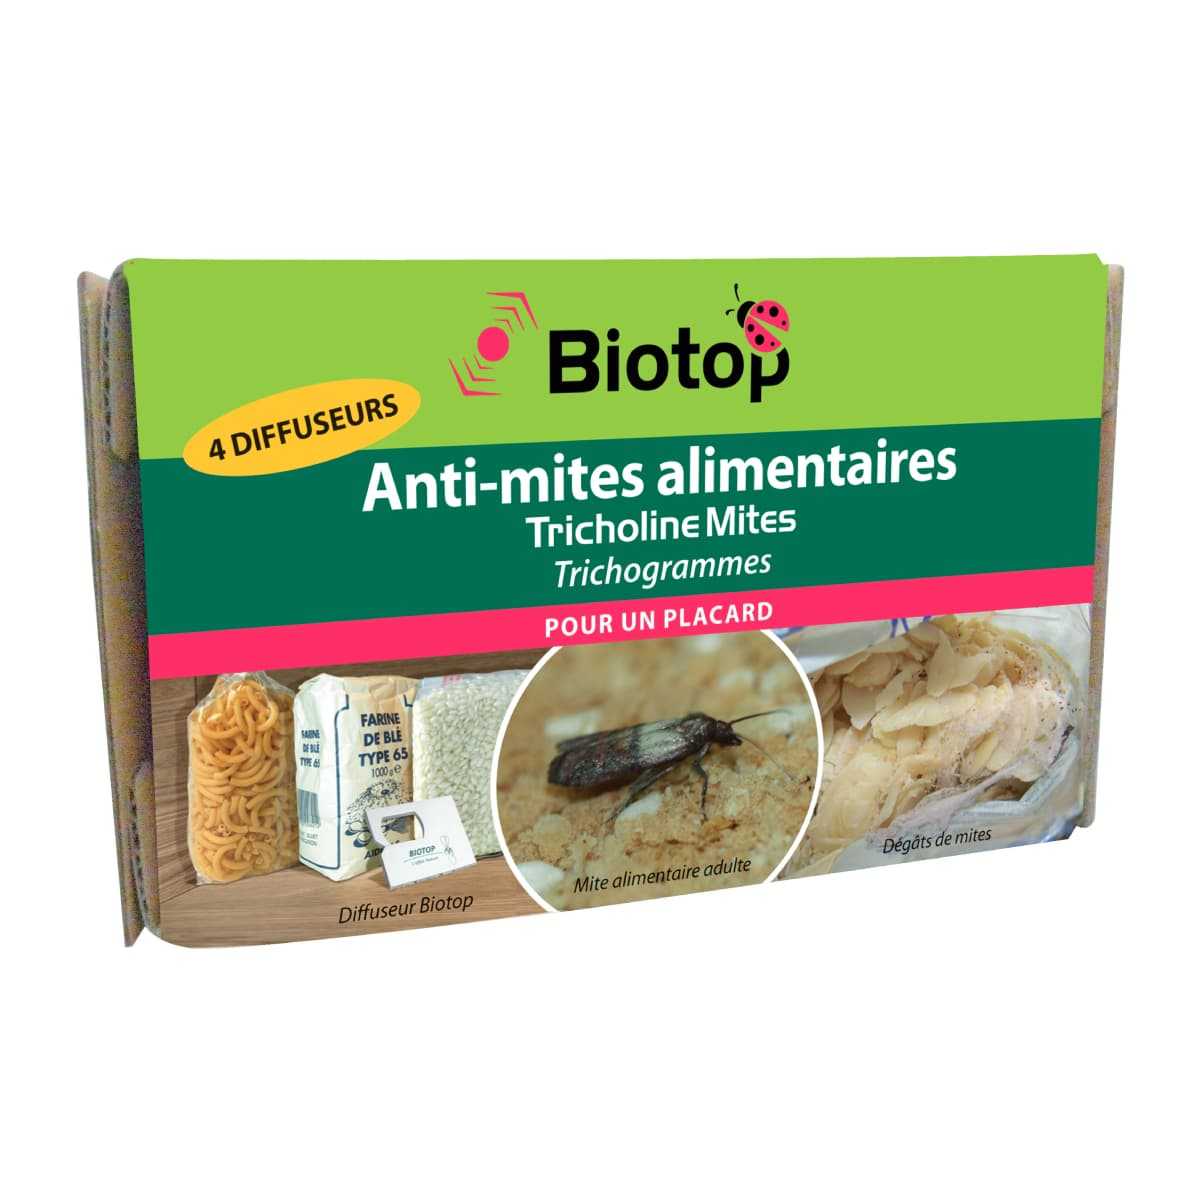 Trichogrammes, Anti mites alimentaires - 1 boite (4 semaines